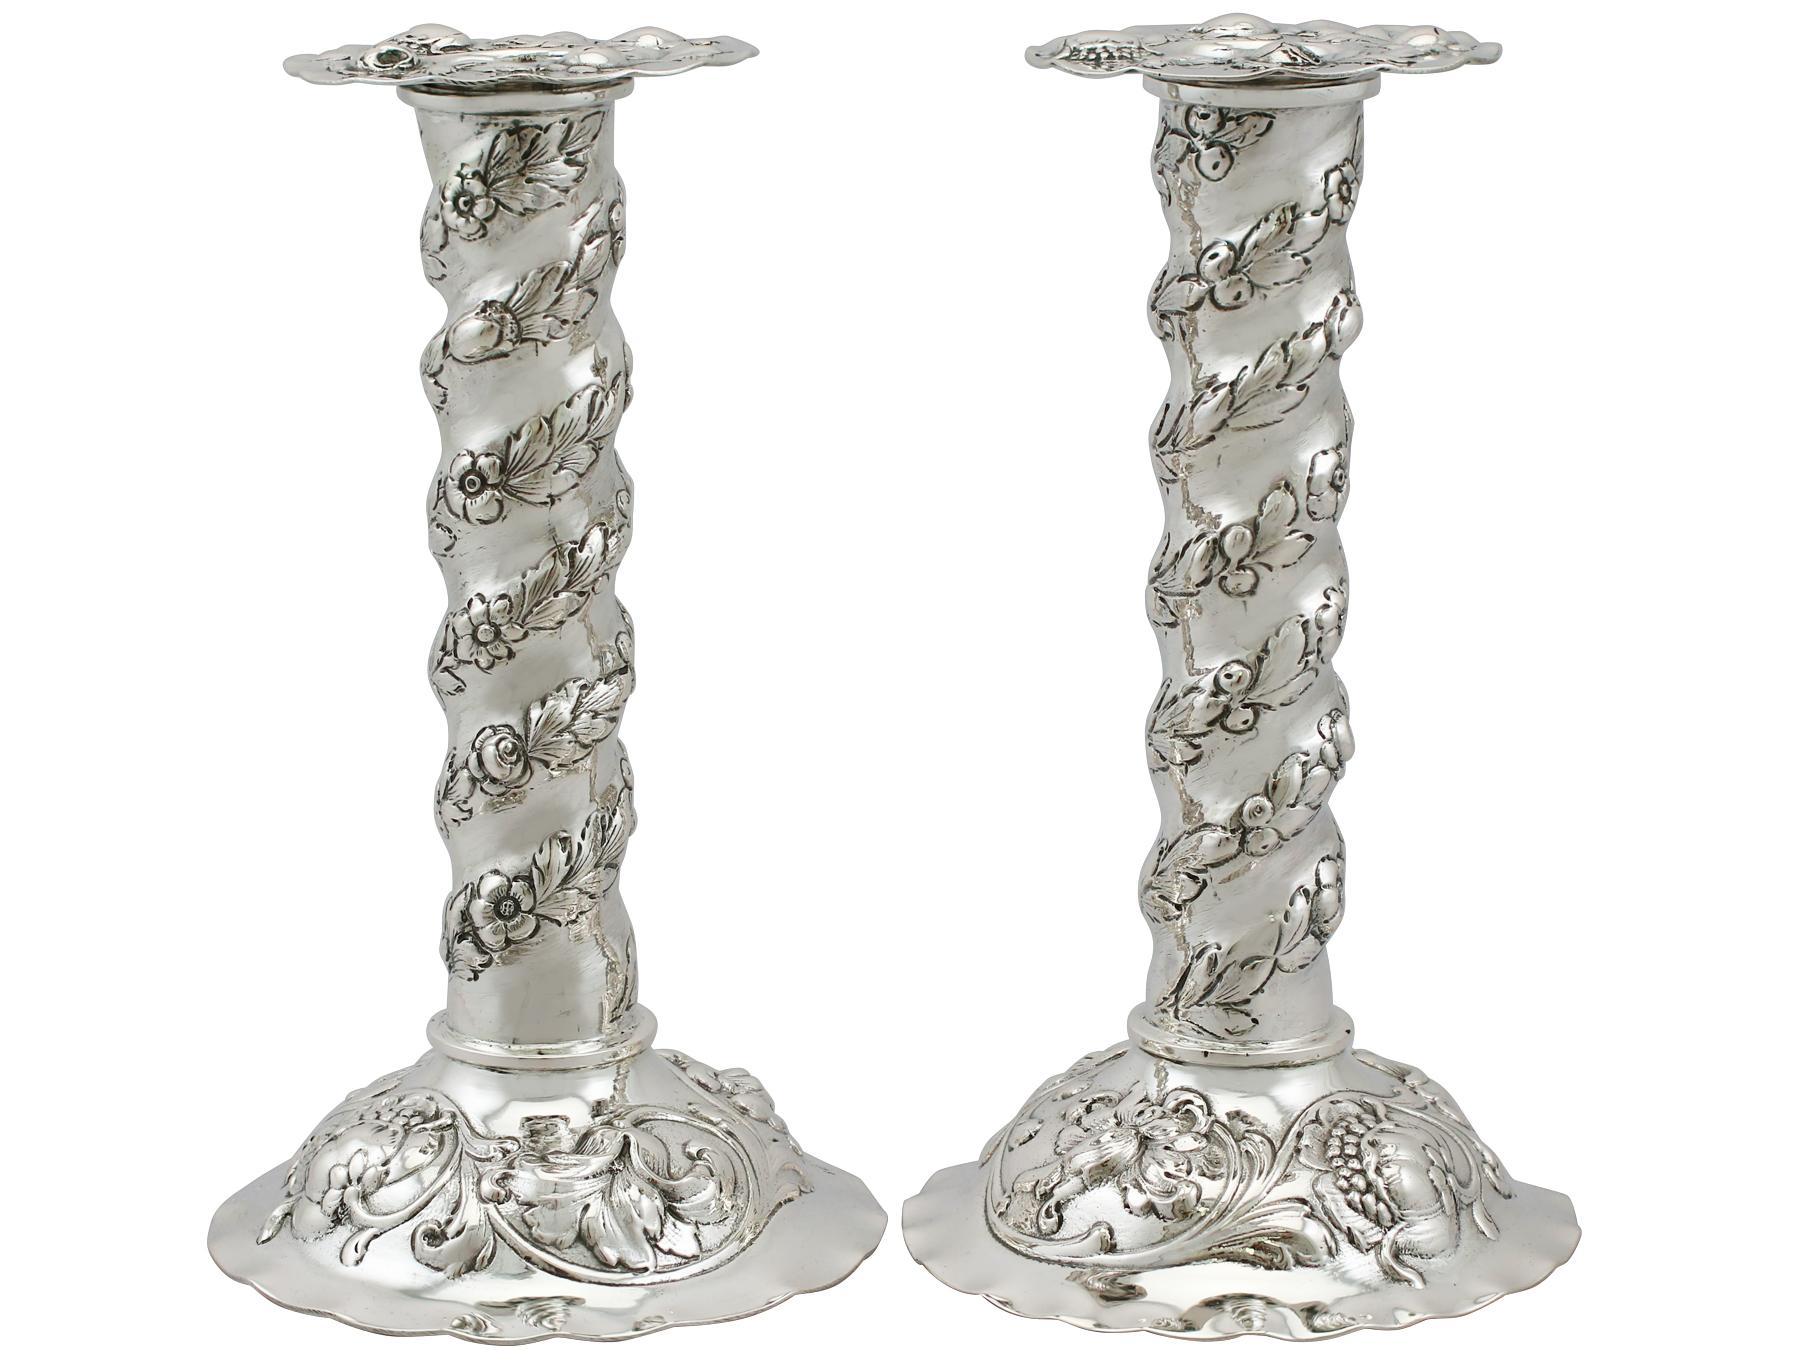 An exceptional, fine and impressive pair of antique Swedish silver candlesticks; an addition to our ornamental silverware collection.

These exceptional antique silver candlesticks have a cylindrical shaped form onto a circular domed base.

The